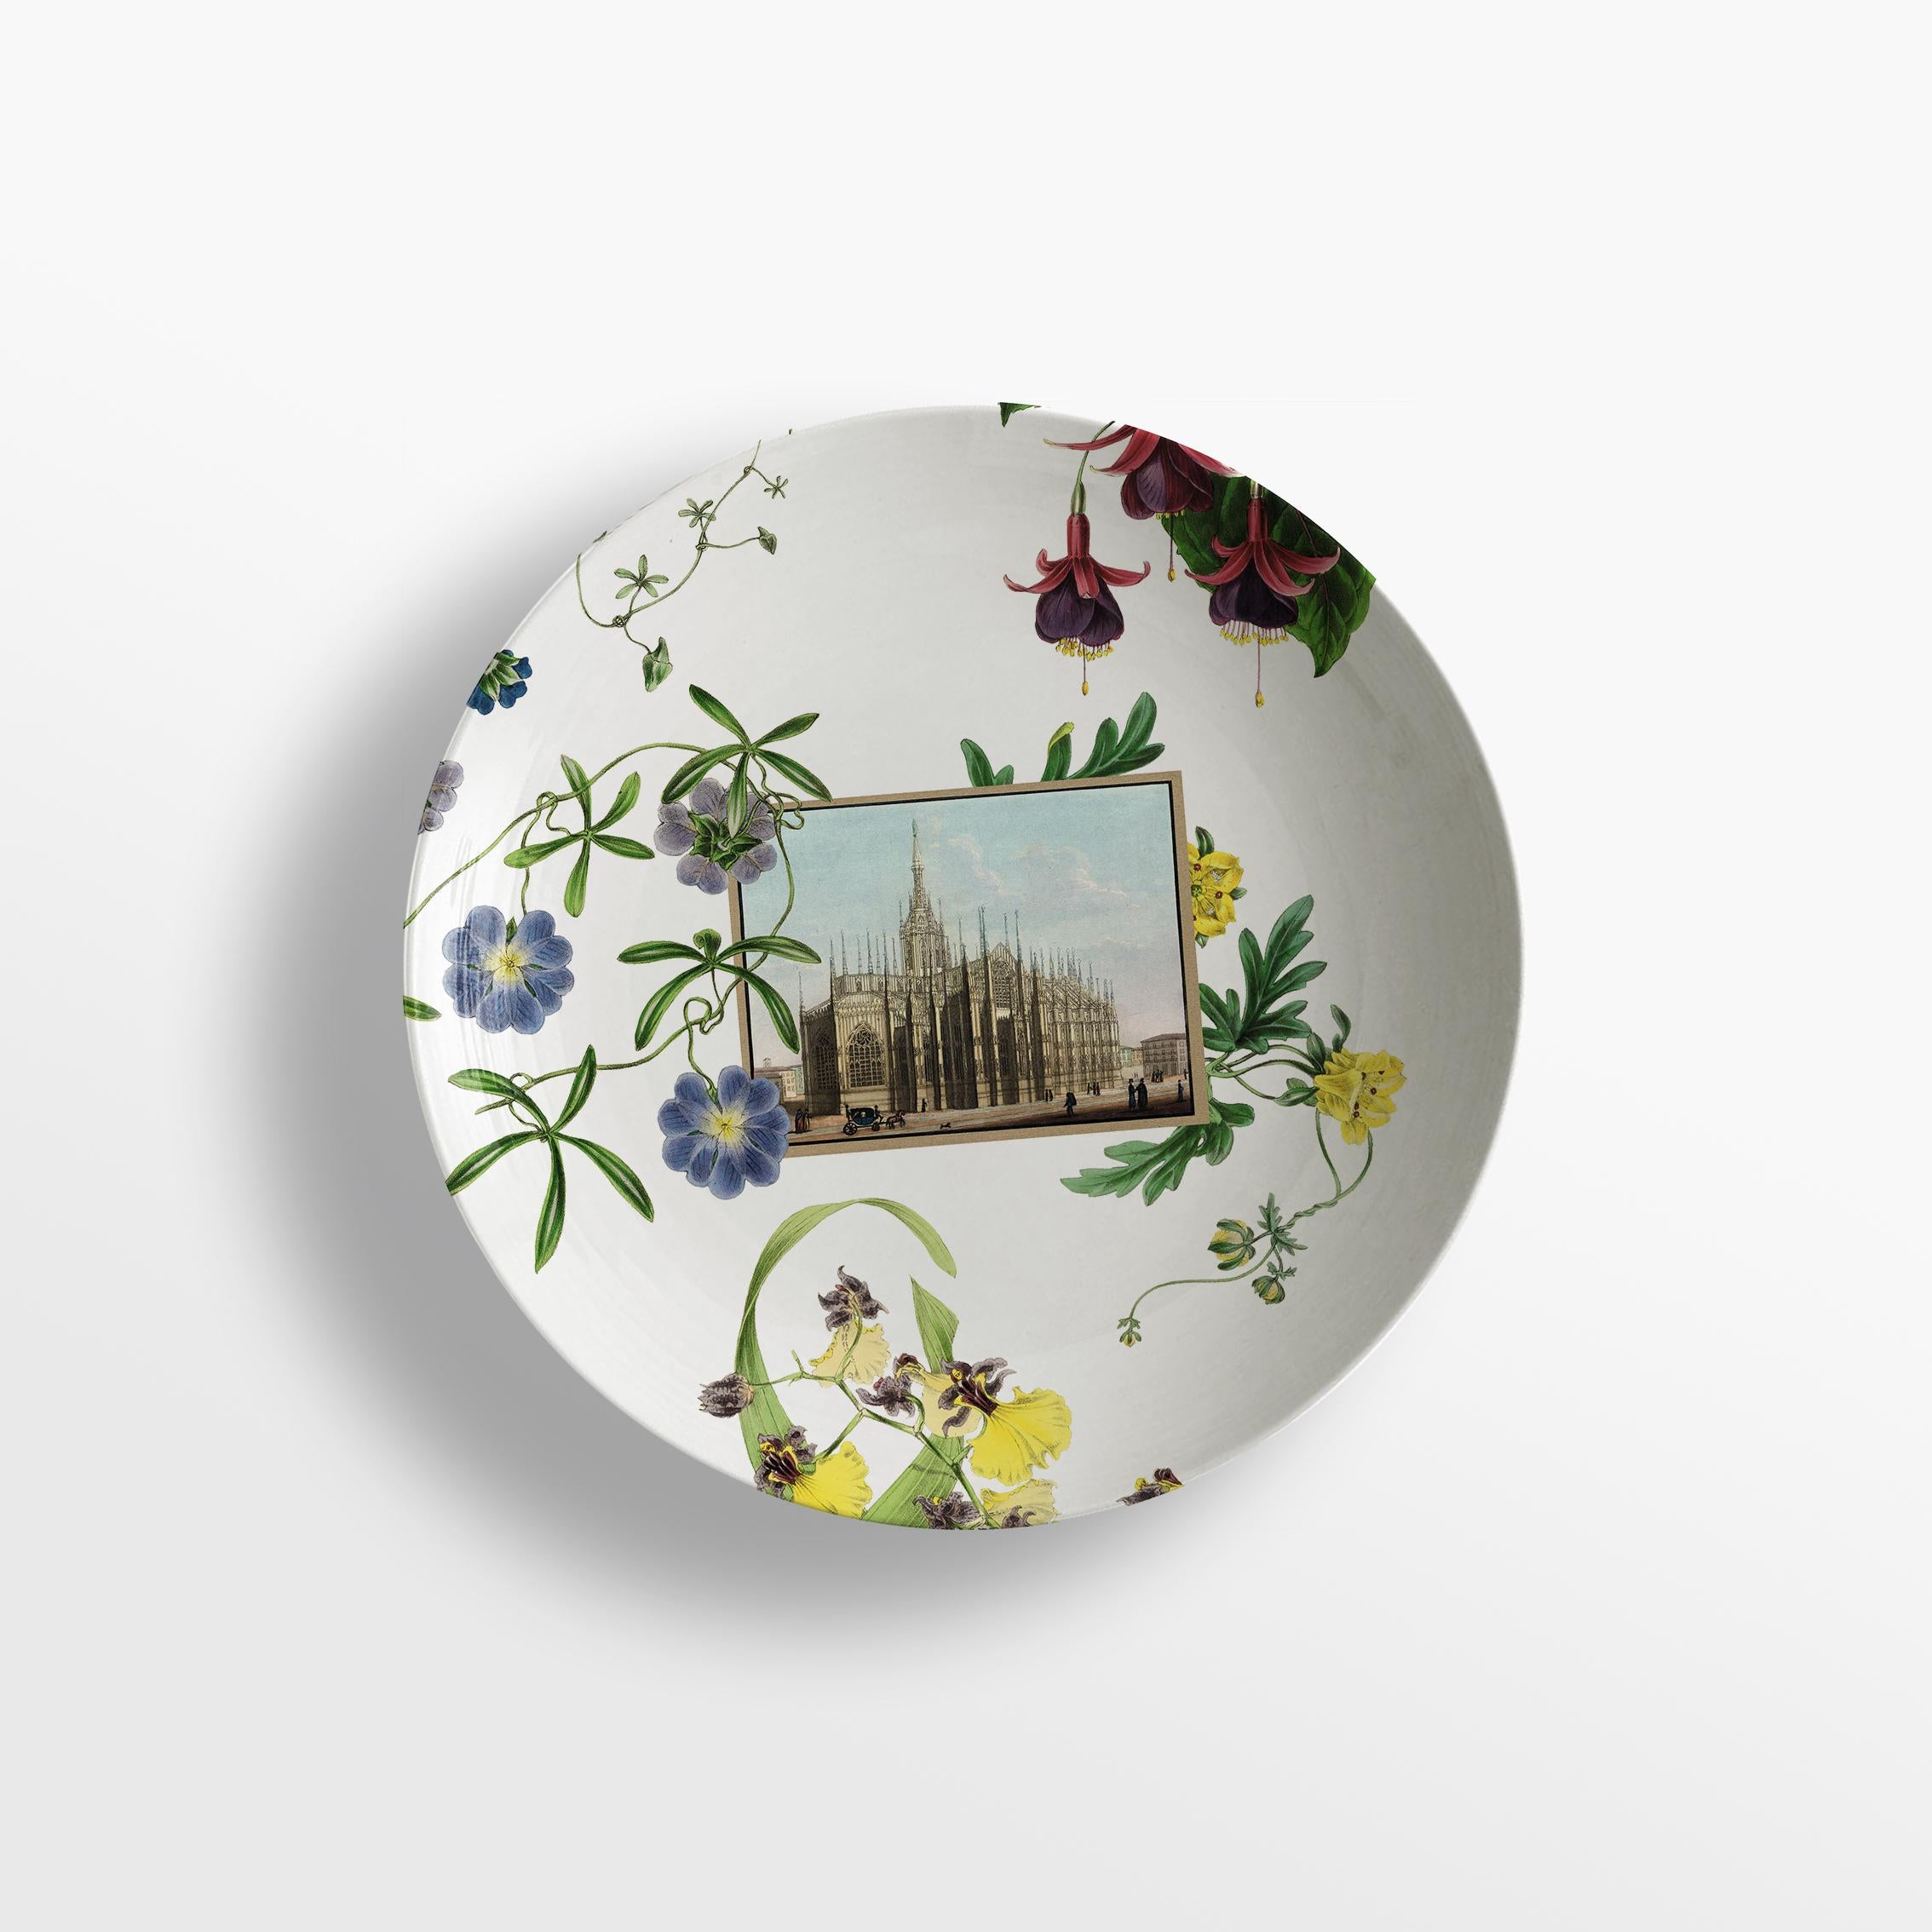 La storia Infinita, Six Contemporary Decorated Porcelain Soup Plates In New Condition For Sale In Milano, Lombardia